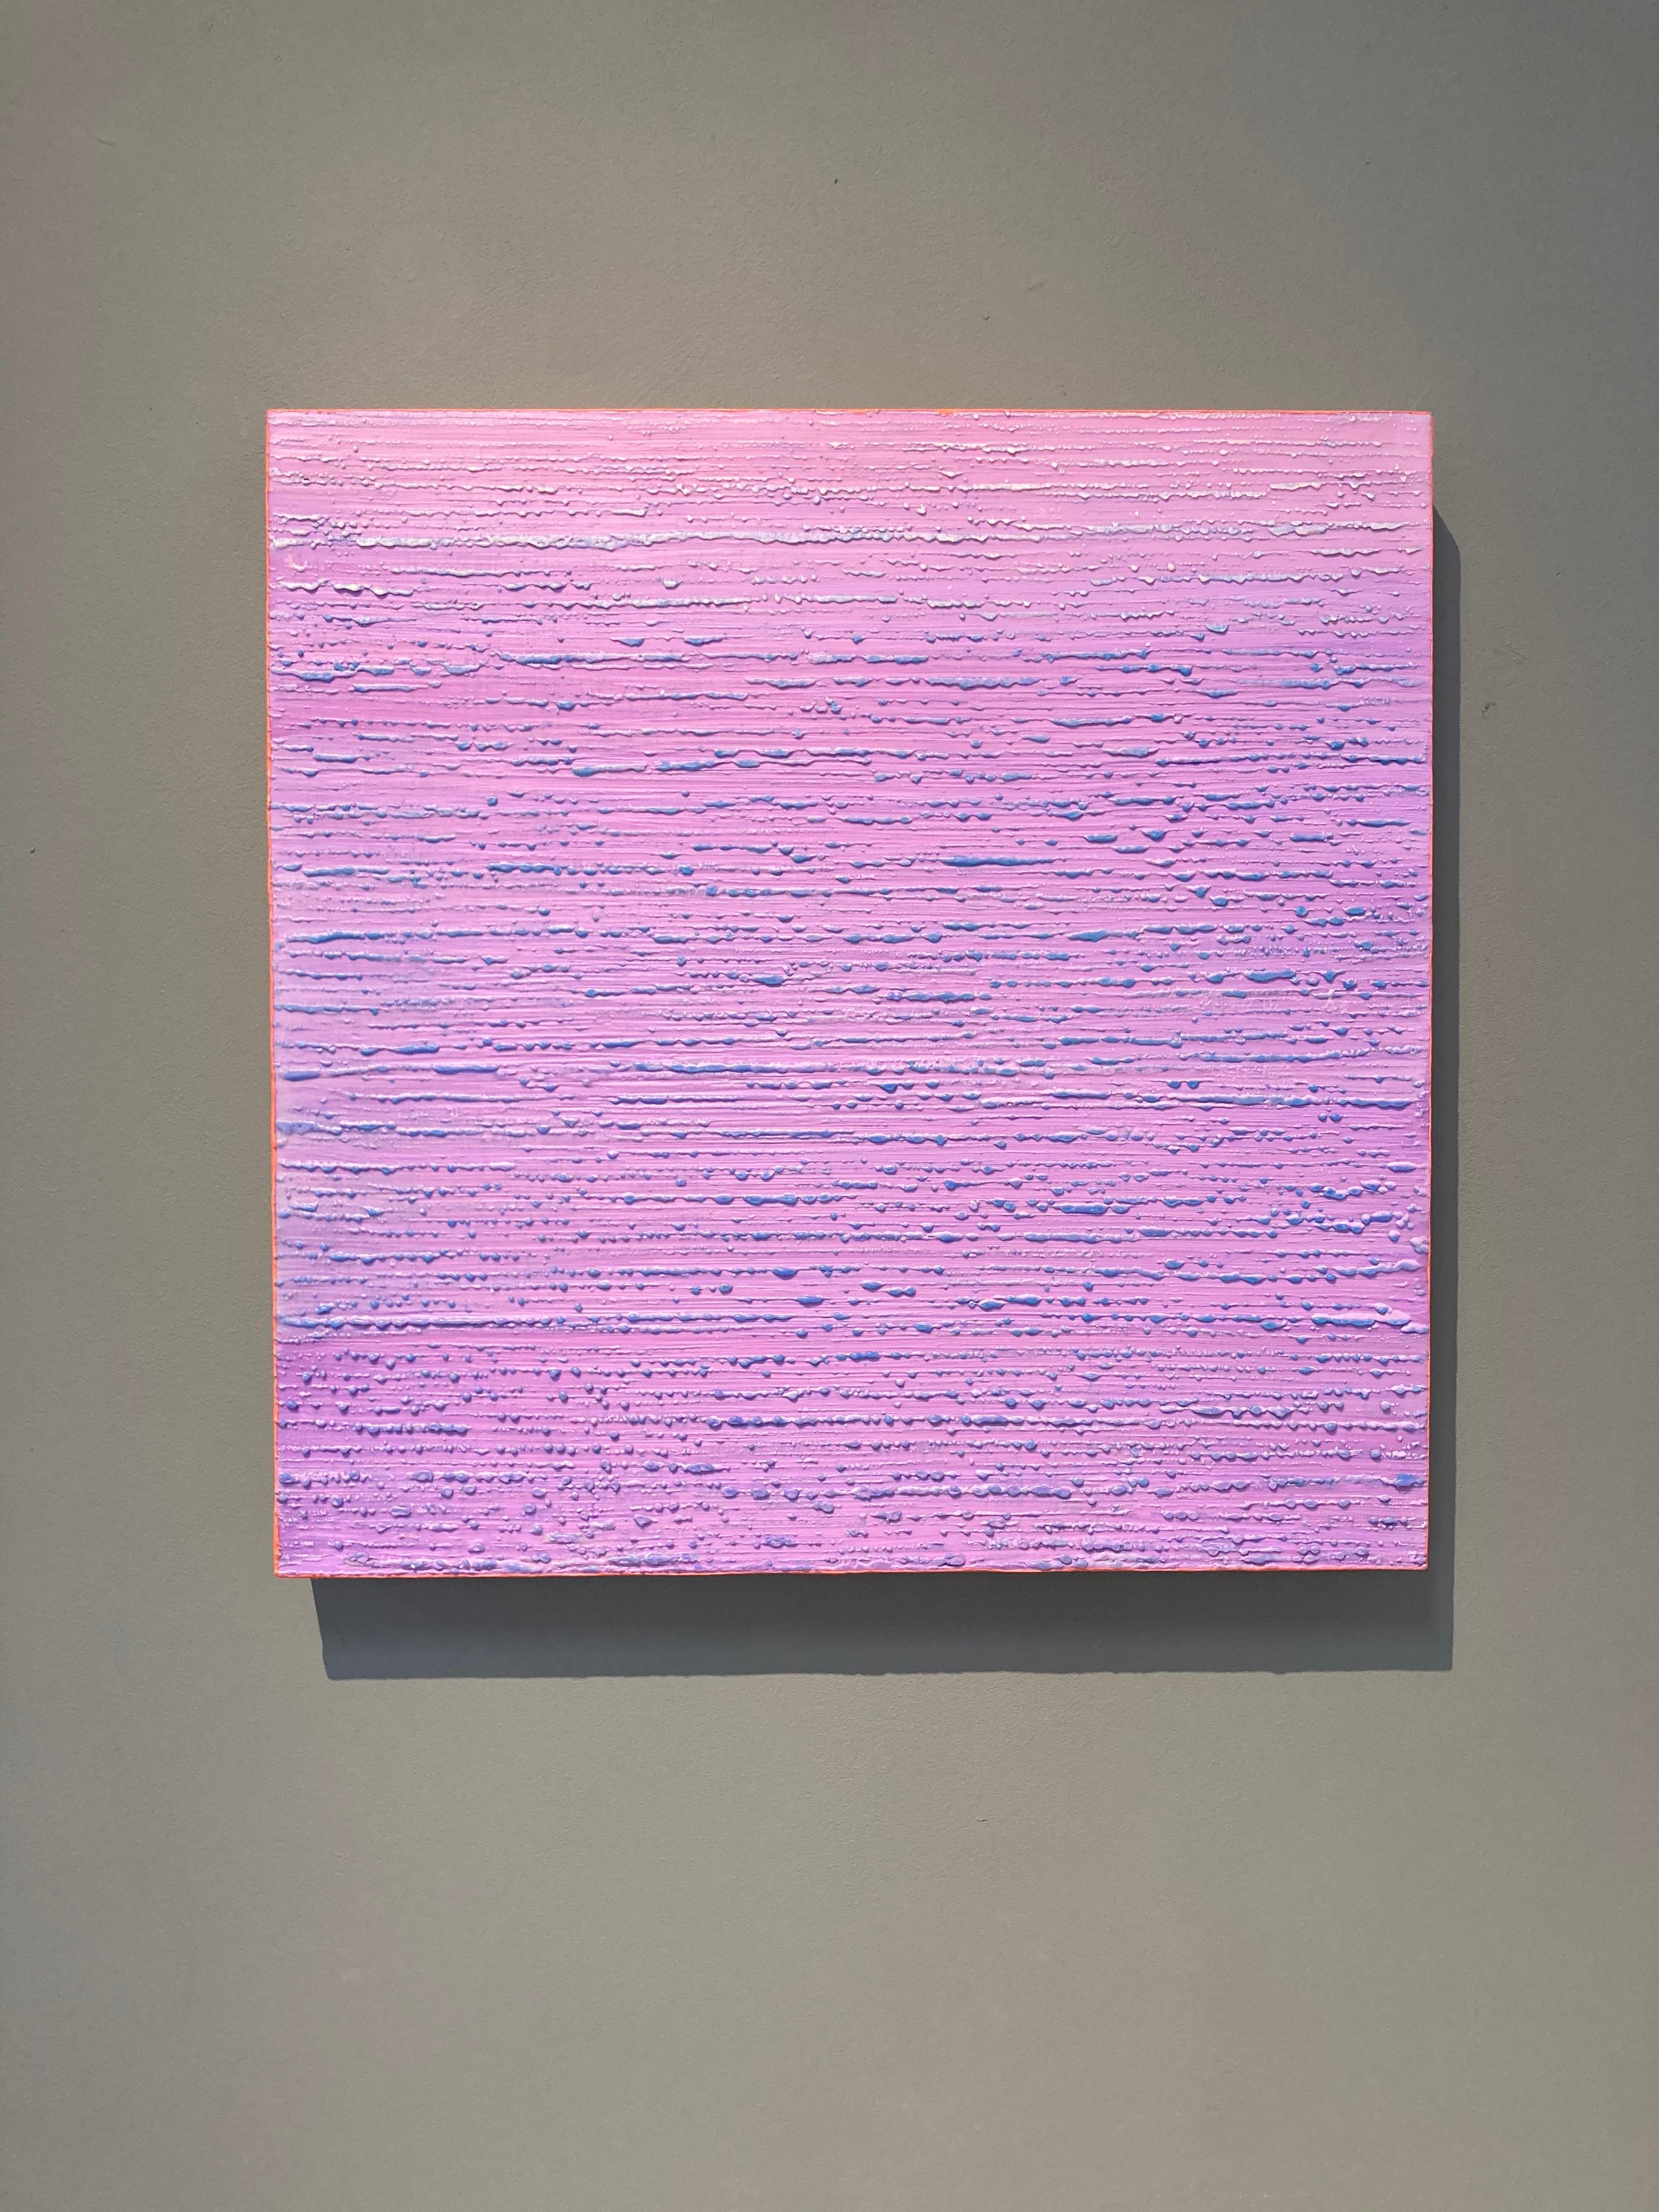 A light lilac purple encaustic (pigmented beeswax) painting with pale teal blue accents and bright coral edges on birch panel. Signed, dated and titled on verso.

Joanne Mattera’s paintings can be described as lush minimalism, the work is